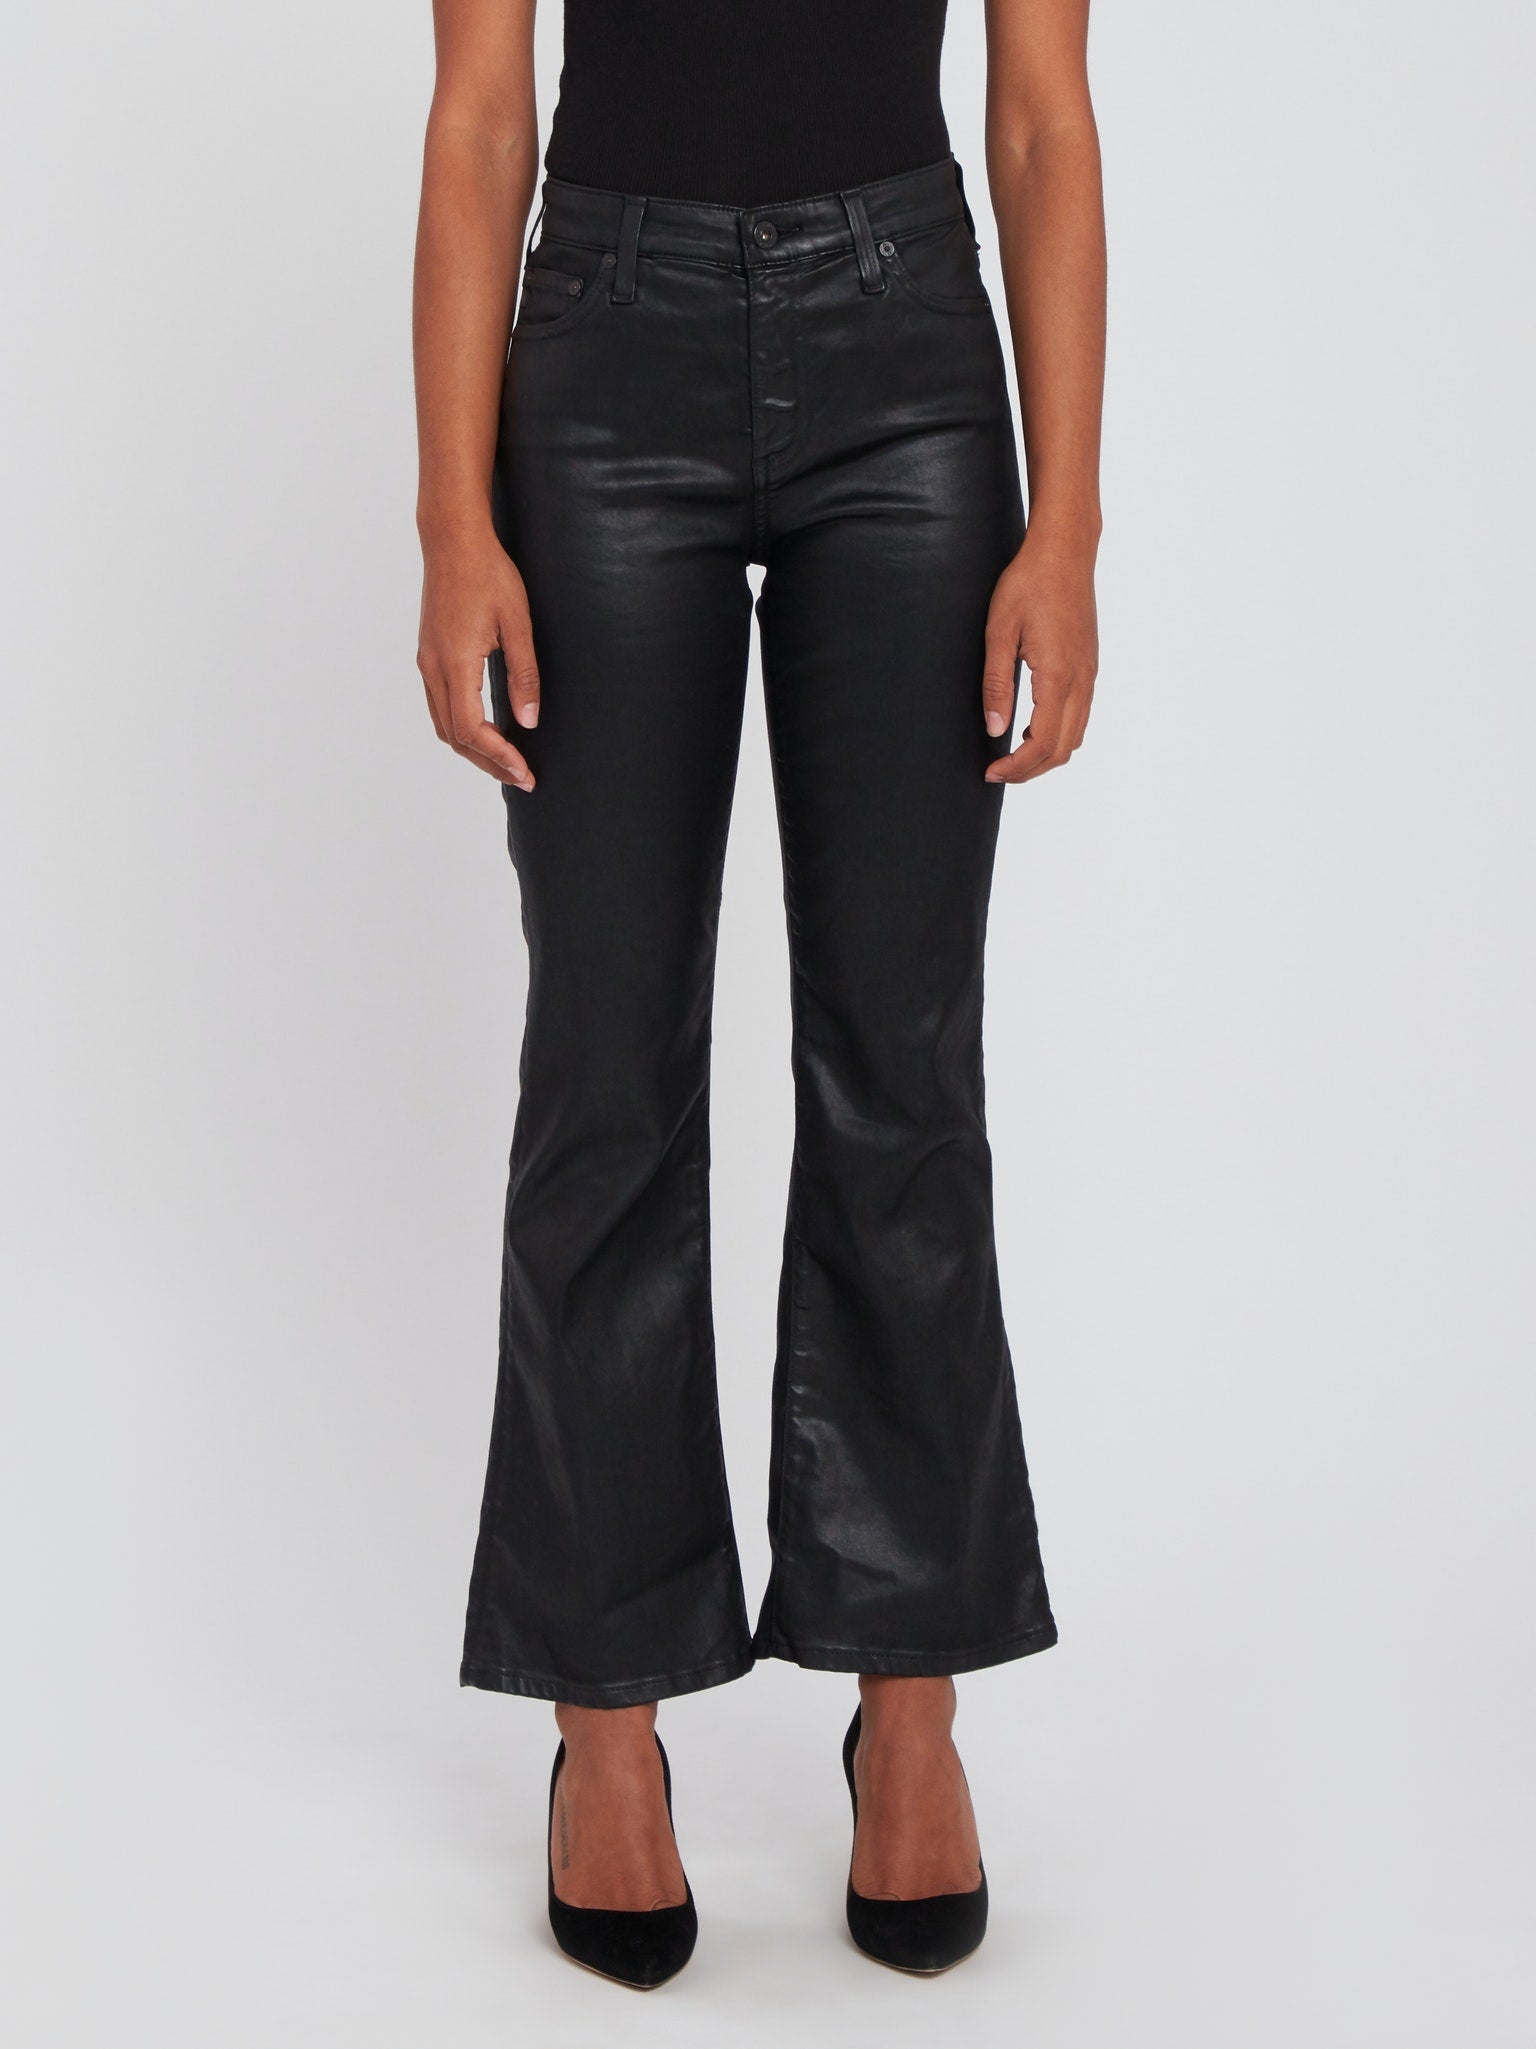 AG + Quinne High Rise Crop Kick Flare Jeans